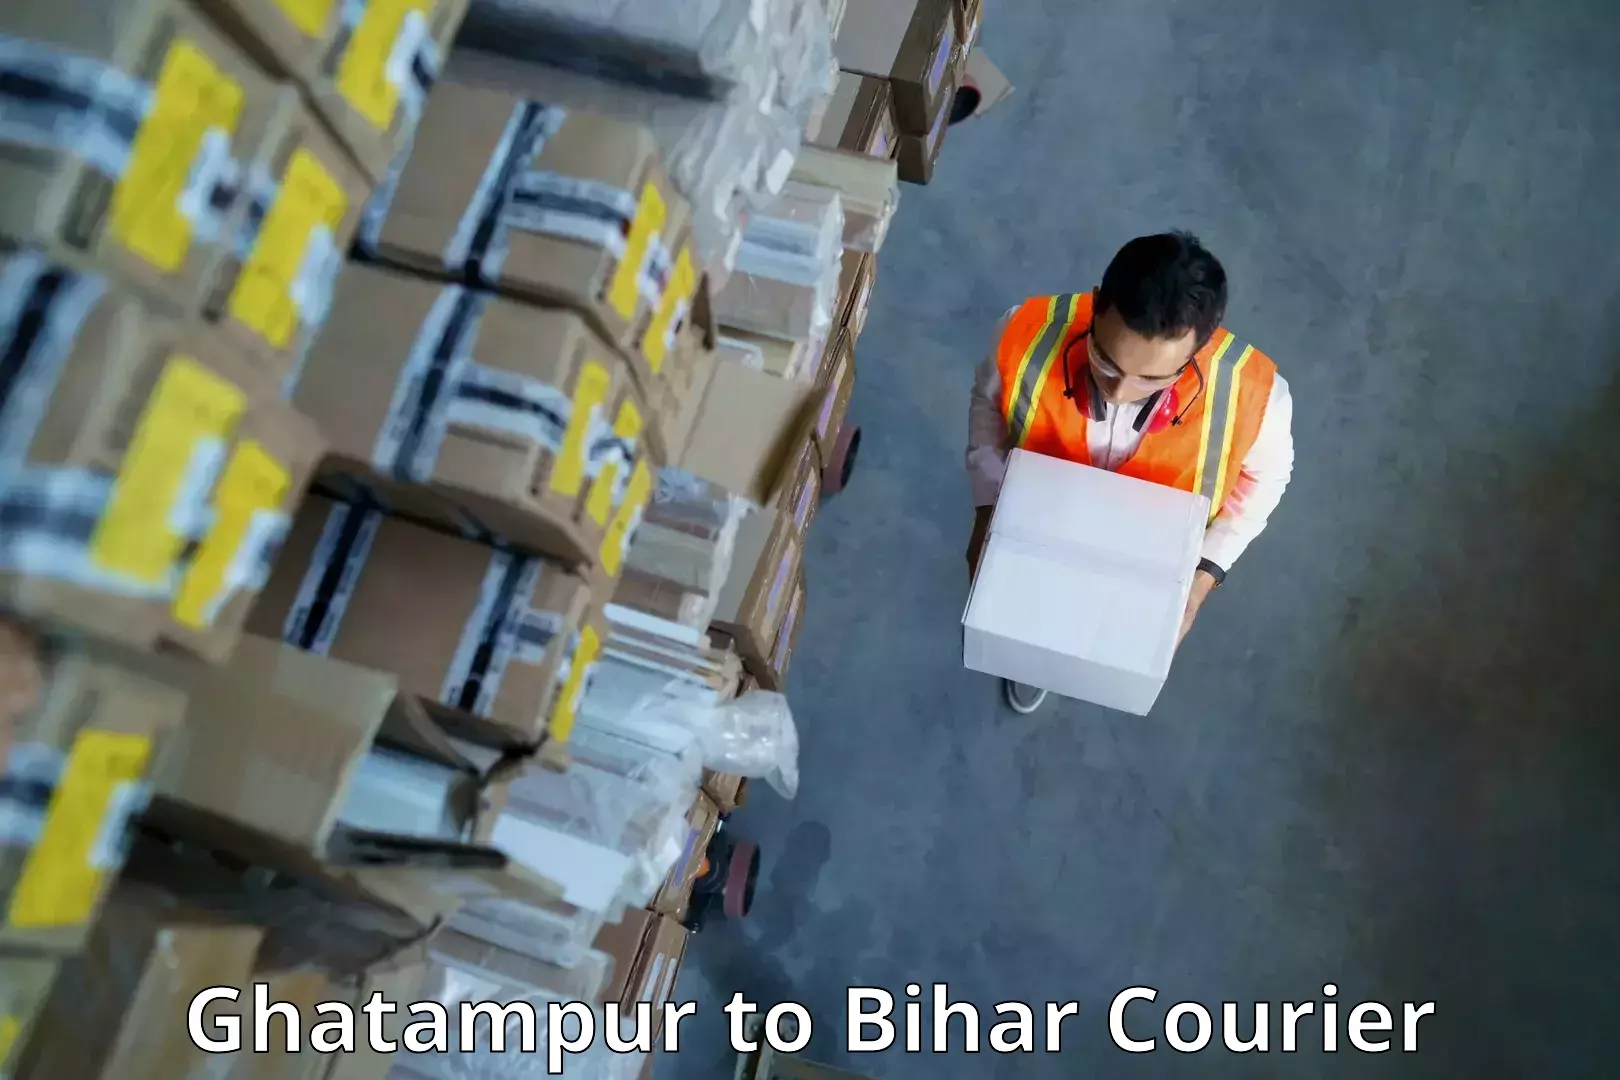 24/7 courier service Ghatampur to Bihar